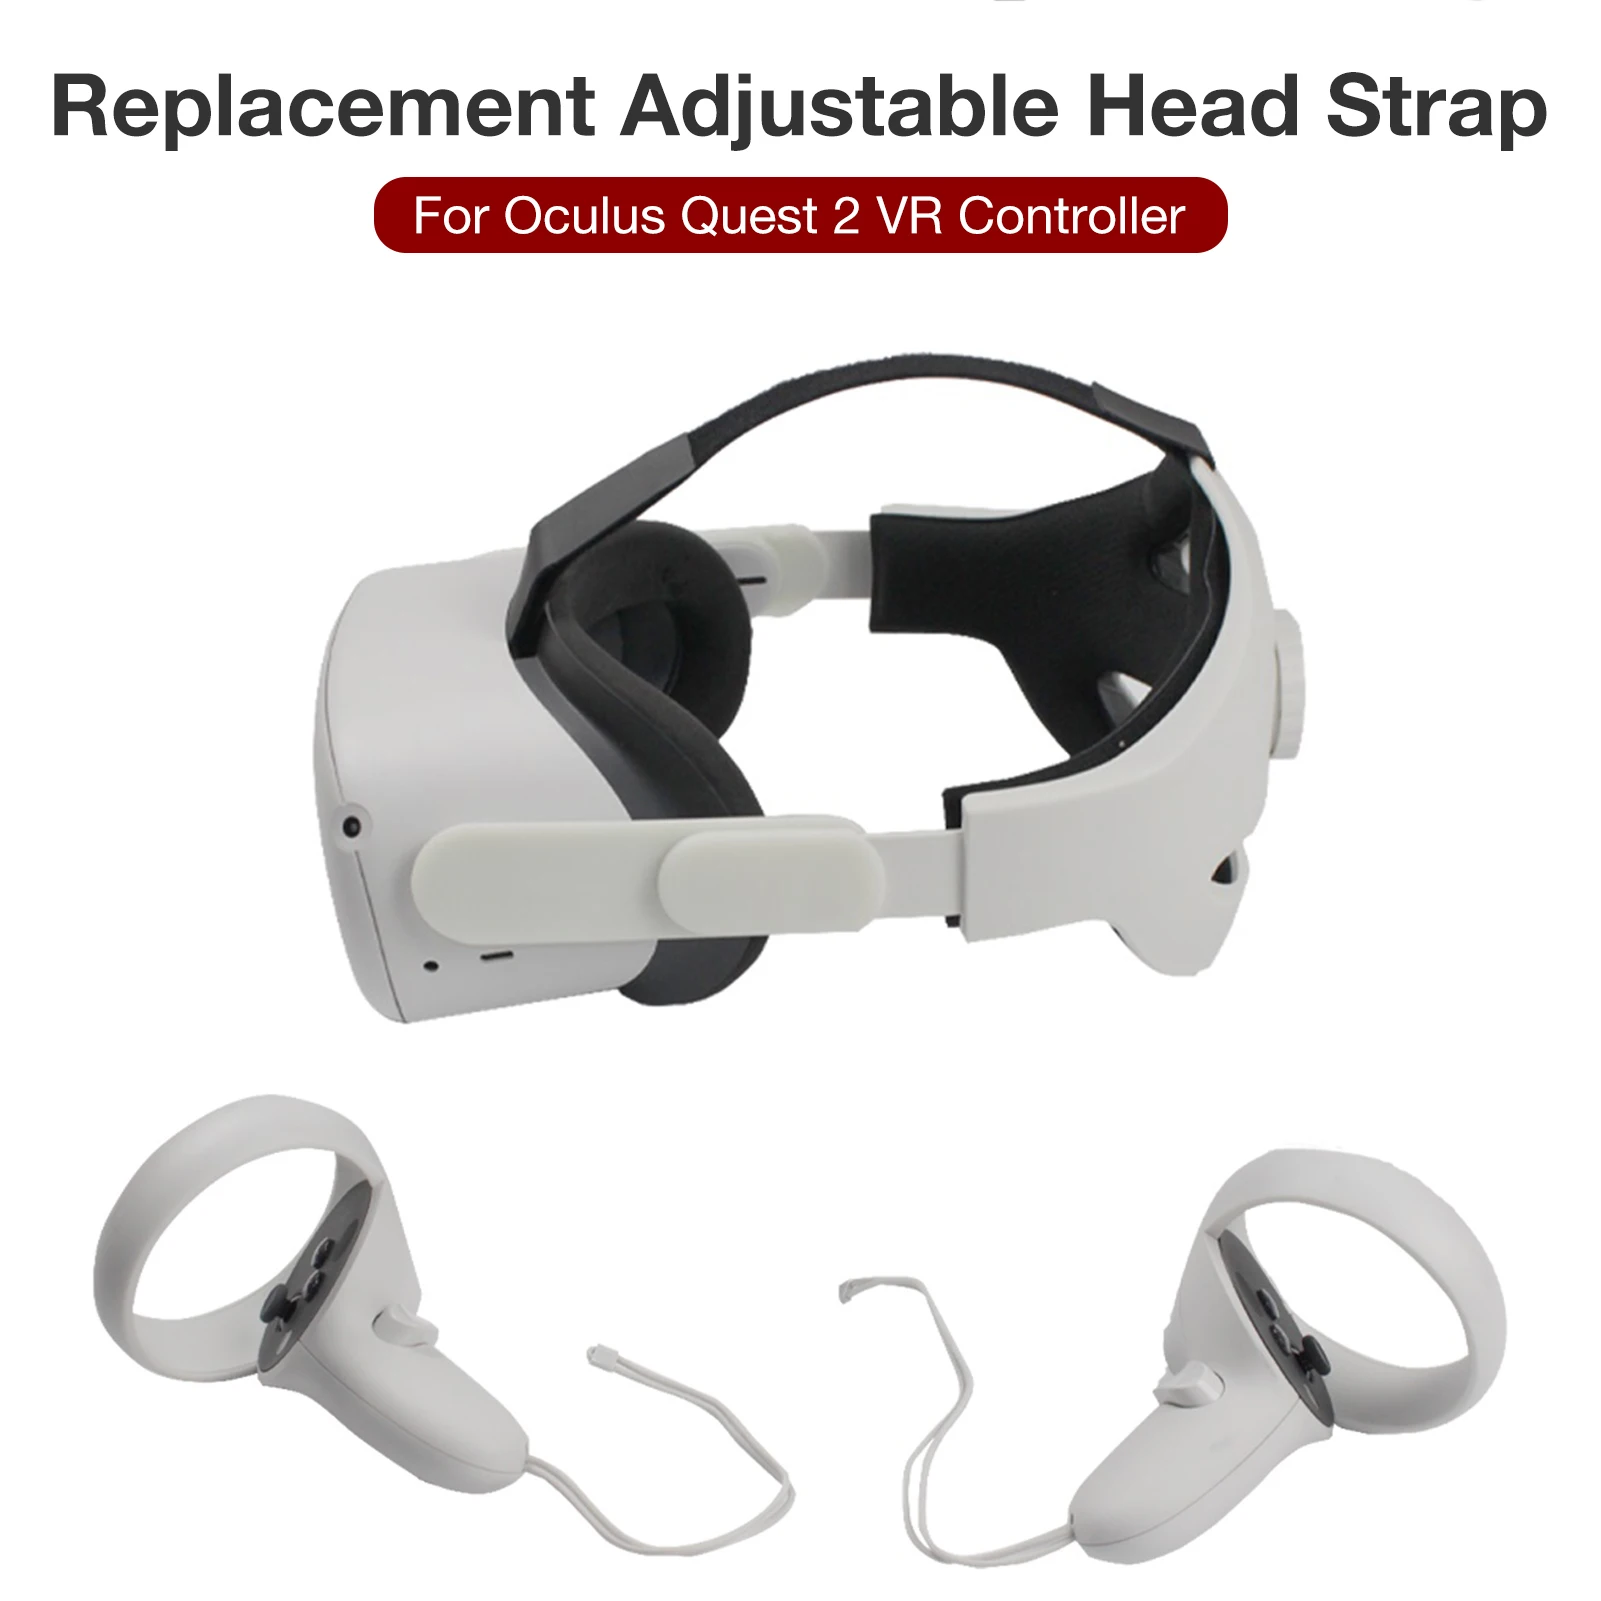 VR Accessories Adjustable Head Strap Headband For Oculus Quest 2 VR ...